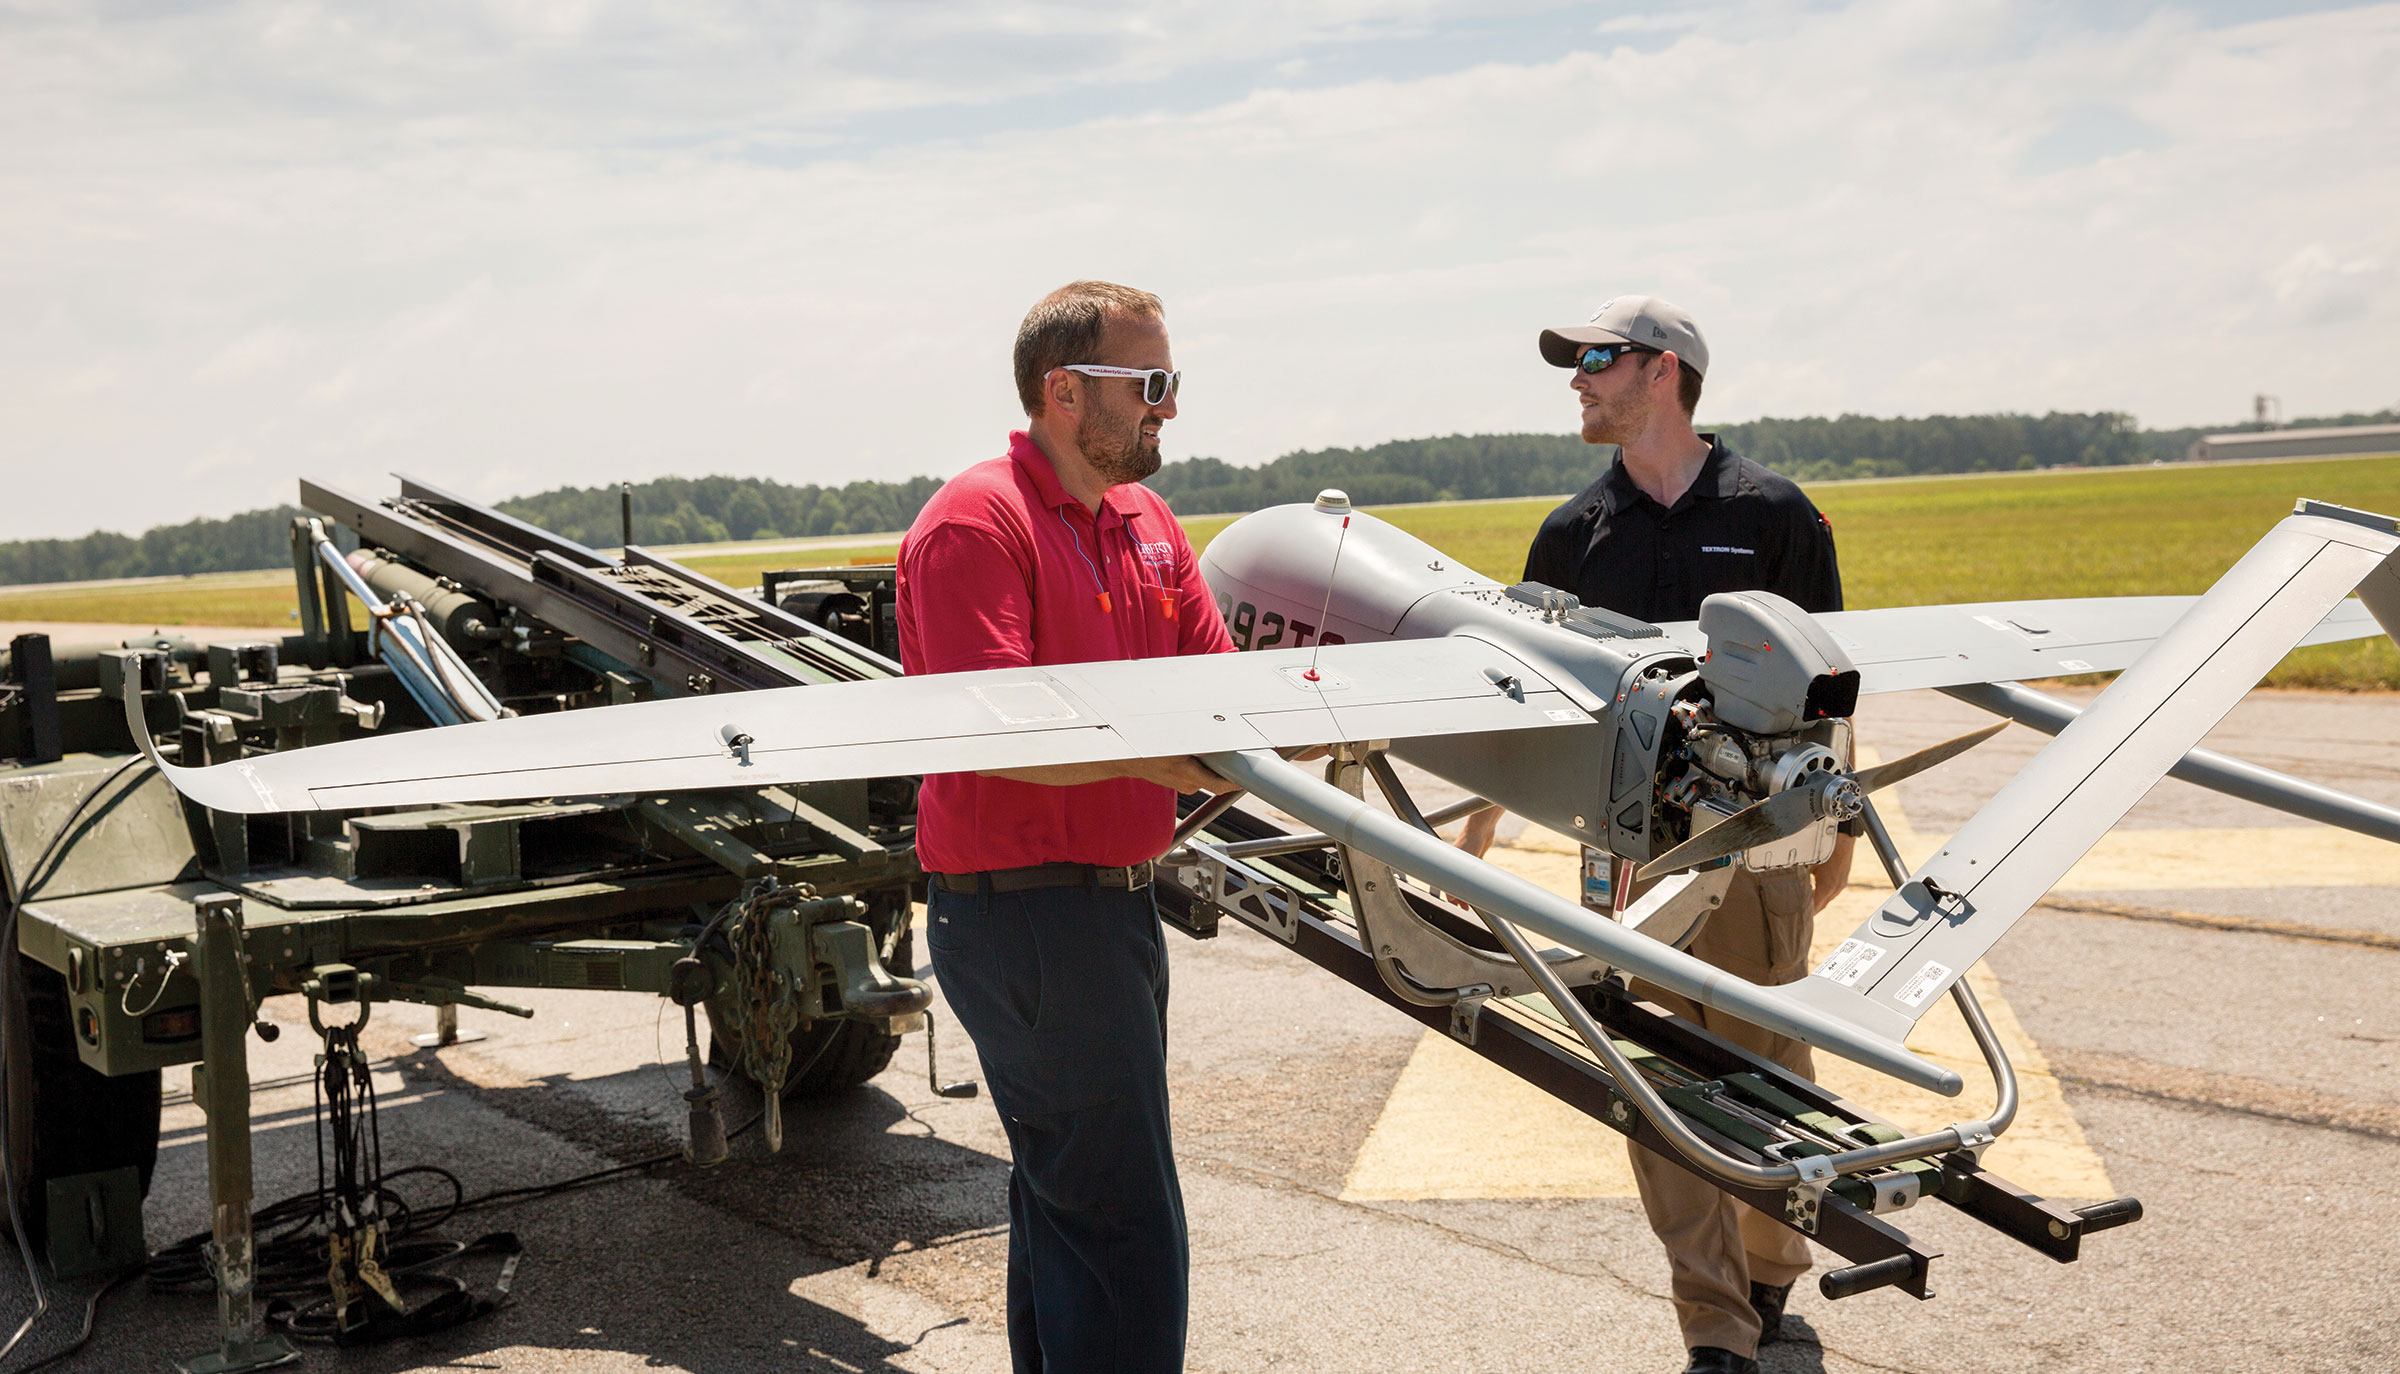 Liberty University assistant professor Steven Brinley and UAS student Luke Reddaway prepare to launch a Textron Systems Aerosonde Small Unmanned Aircraft at Textron's facility in Blackstone, Va.